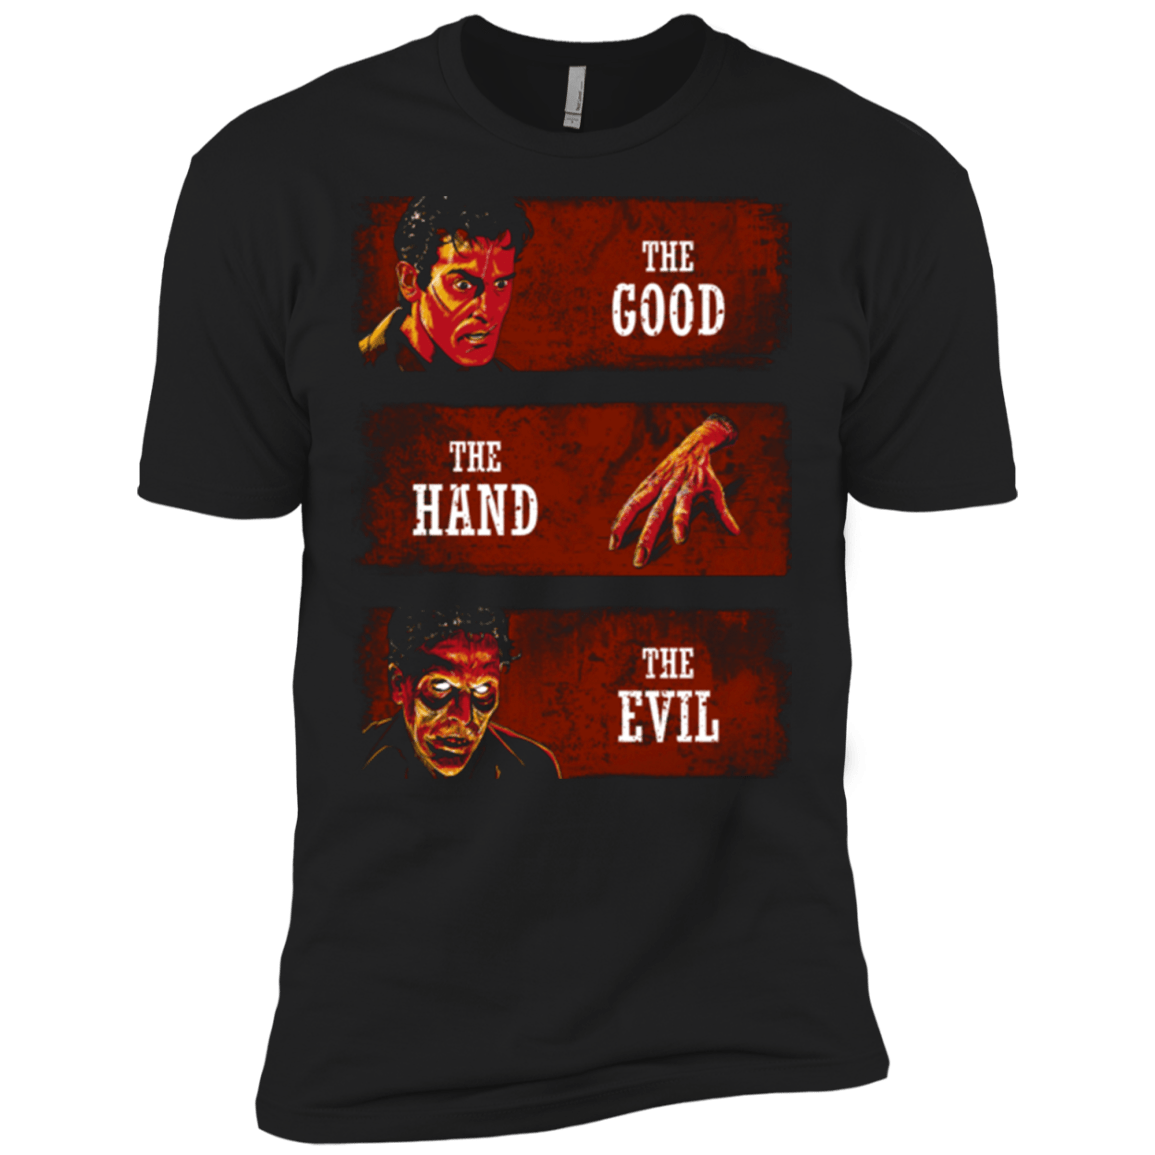 T-Shirts Black / X-Small The Good the Hand and the Evil Men's Premium T-Shirt